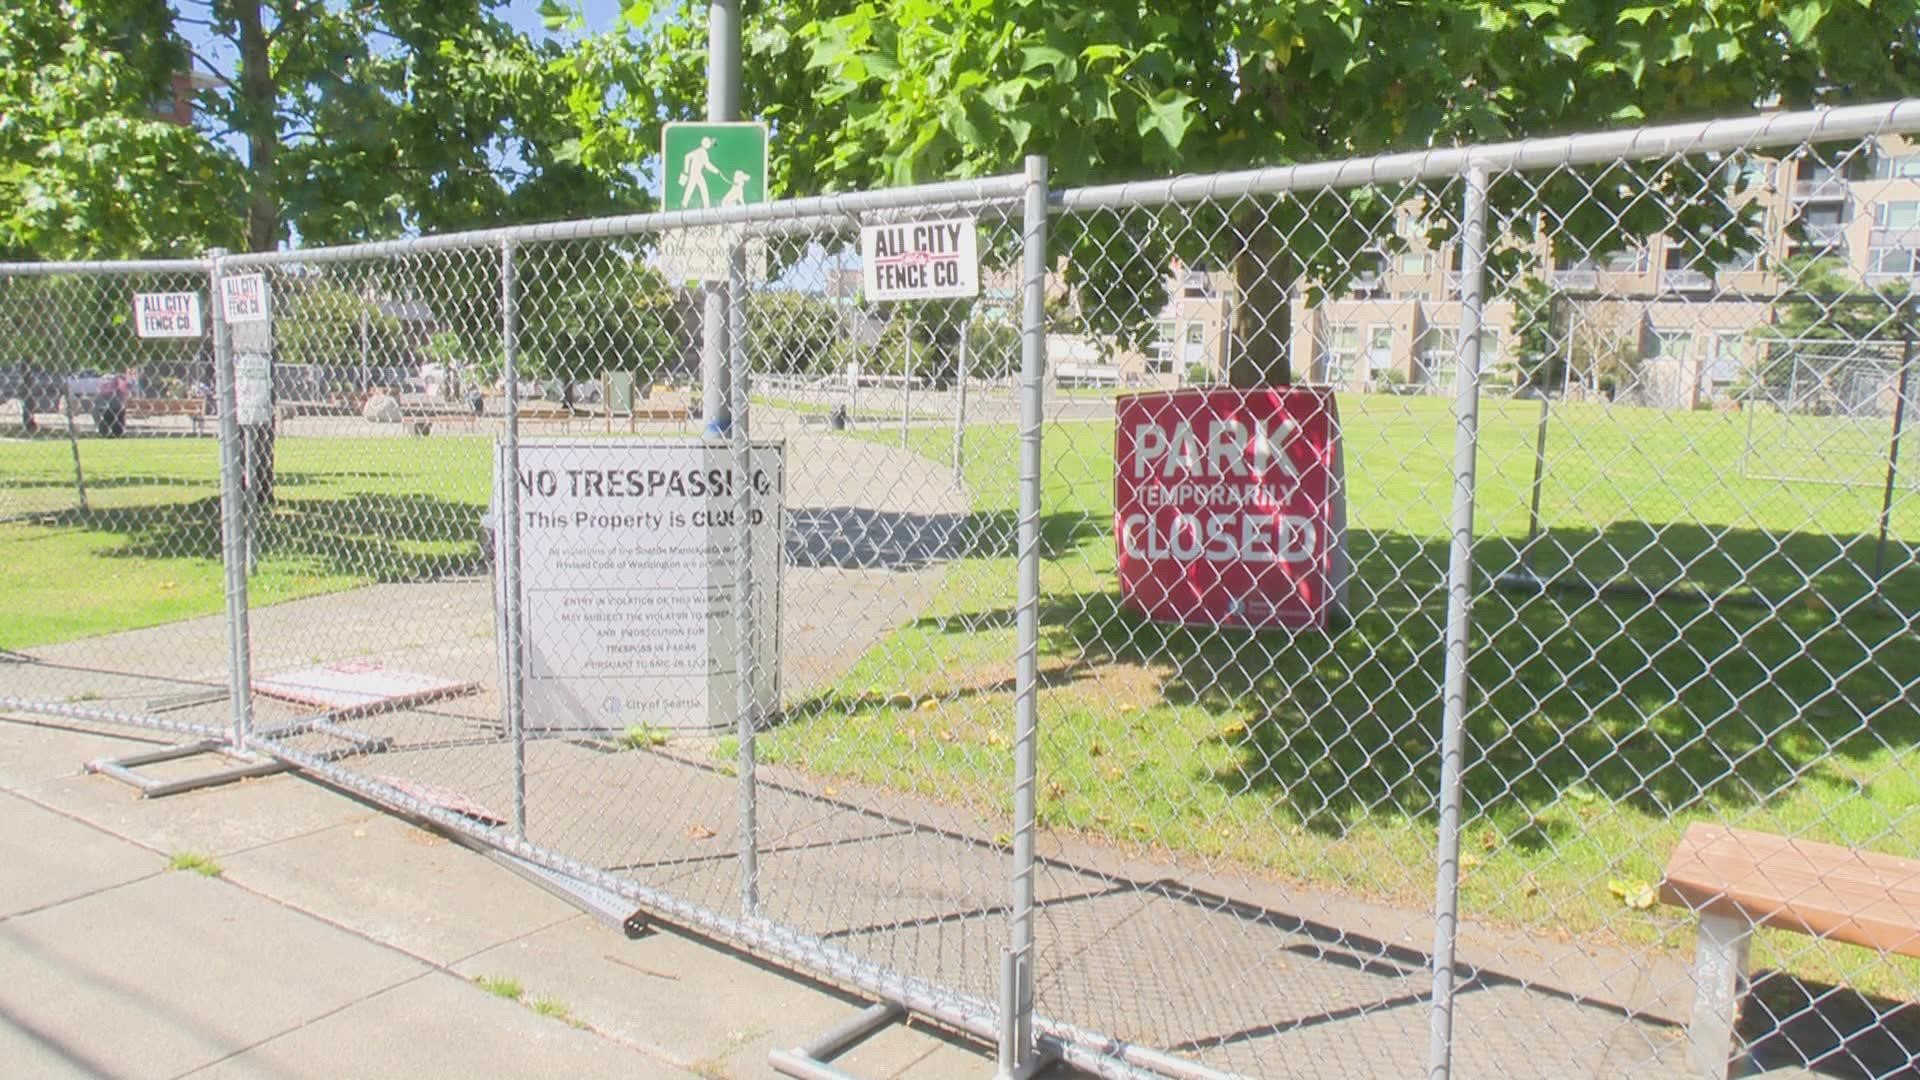 It has been about 8 months since the City of Seattle closed a popular park after clearing out a homeless encampment.